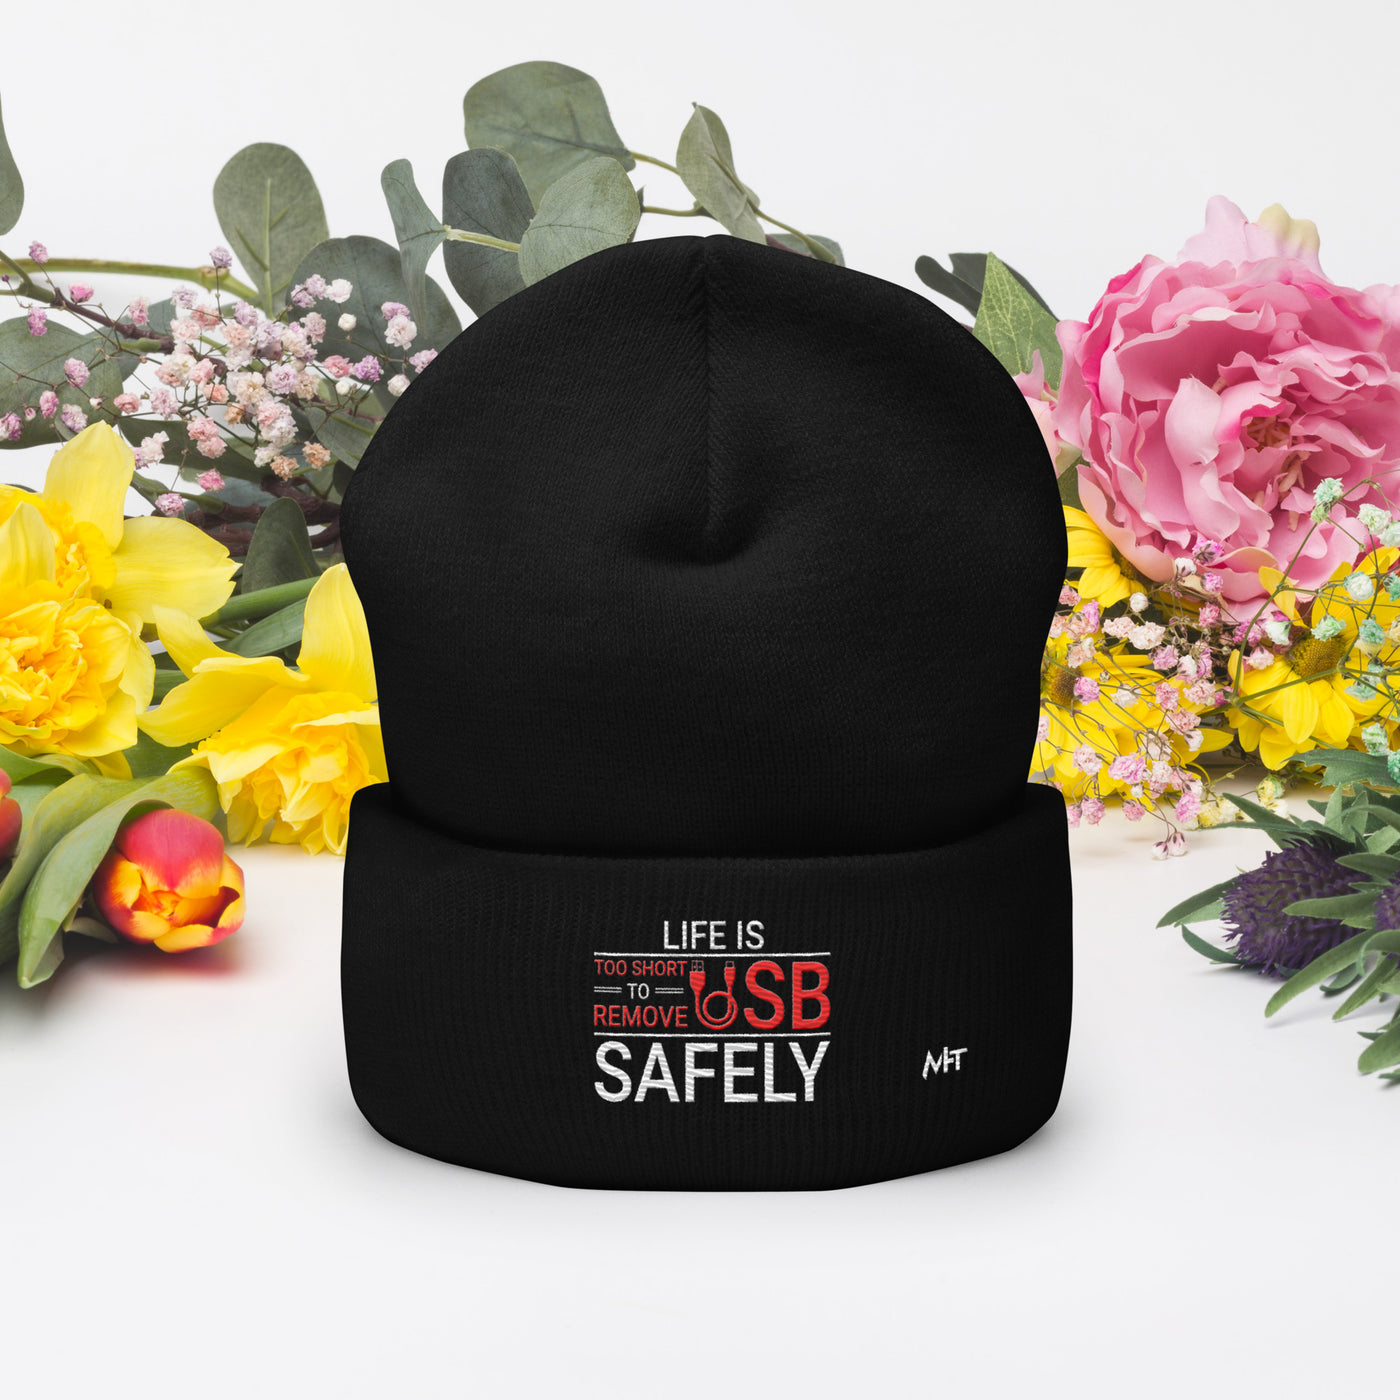 Life is too Short to Remove USB Safely - Cuffed Beanie